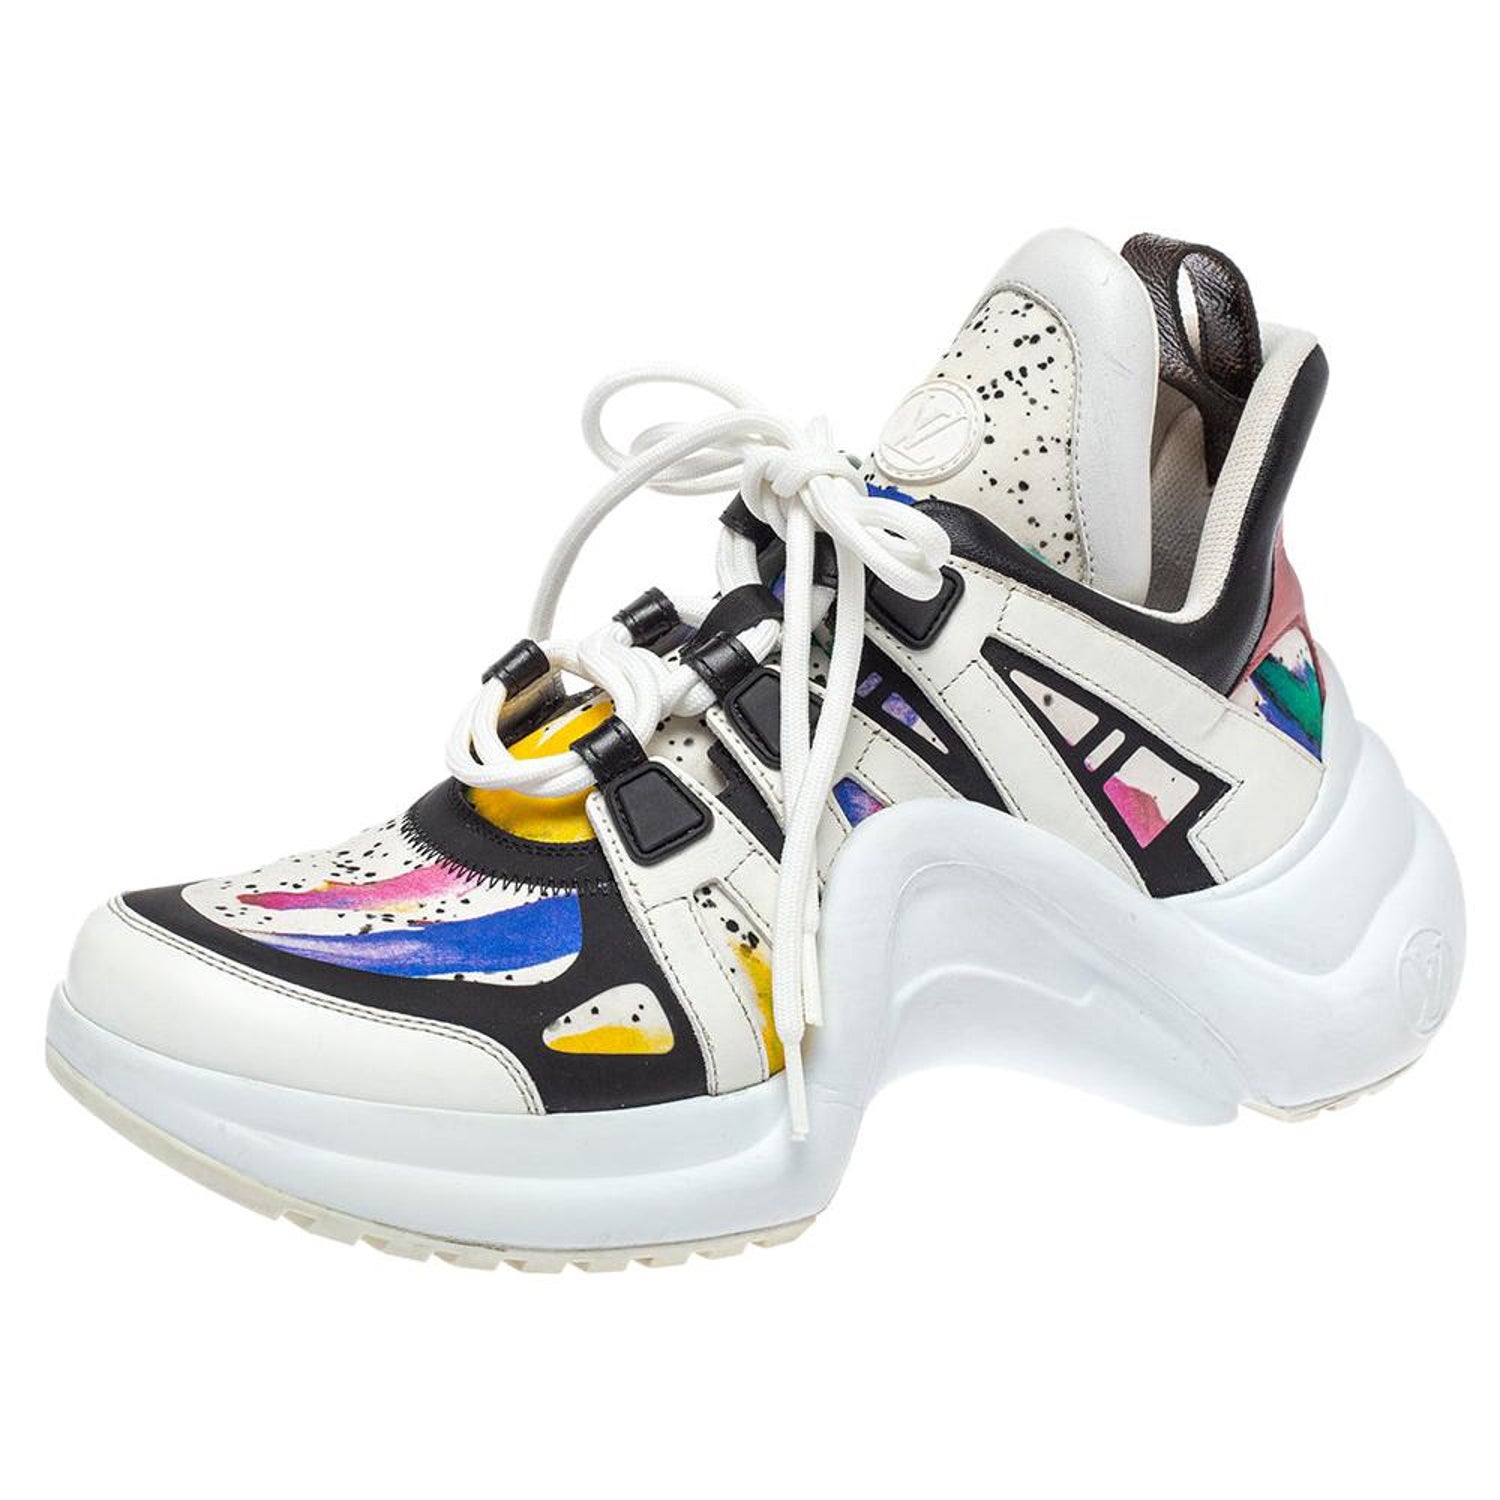 Louis Vuitton - Authenticated Archlight Trainer - Leather Multicolour for Women, Good Condition